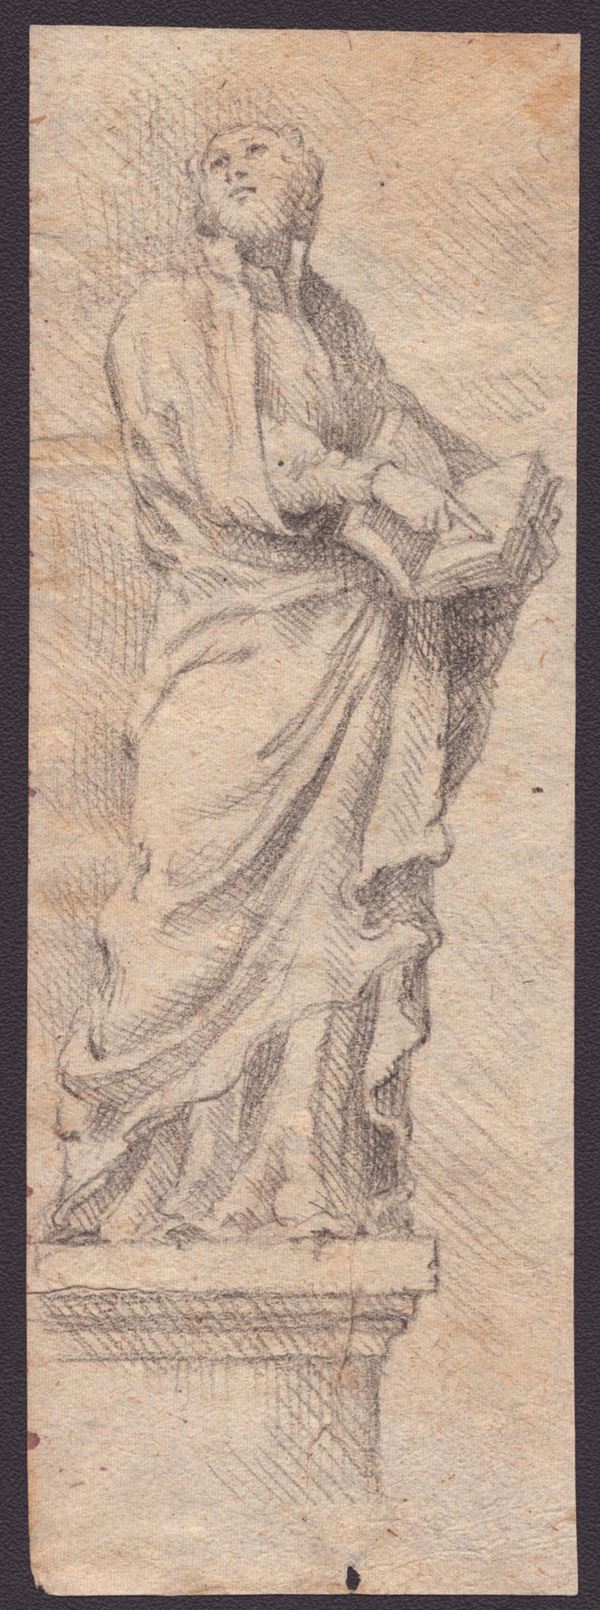 Study for a figure with book